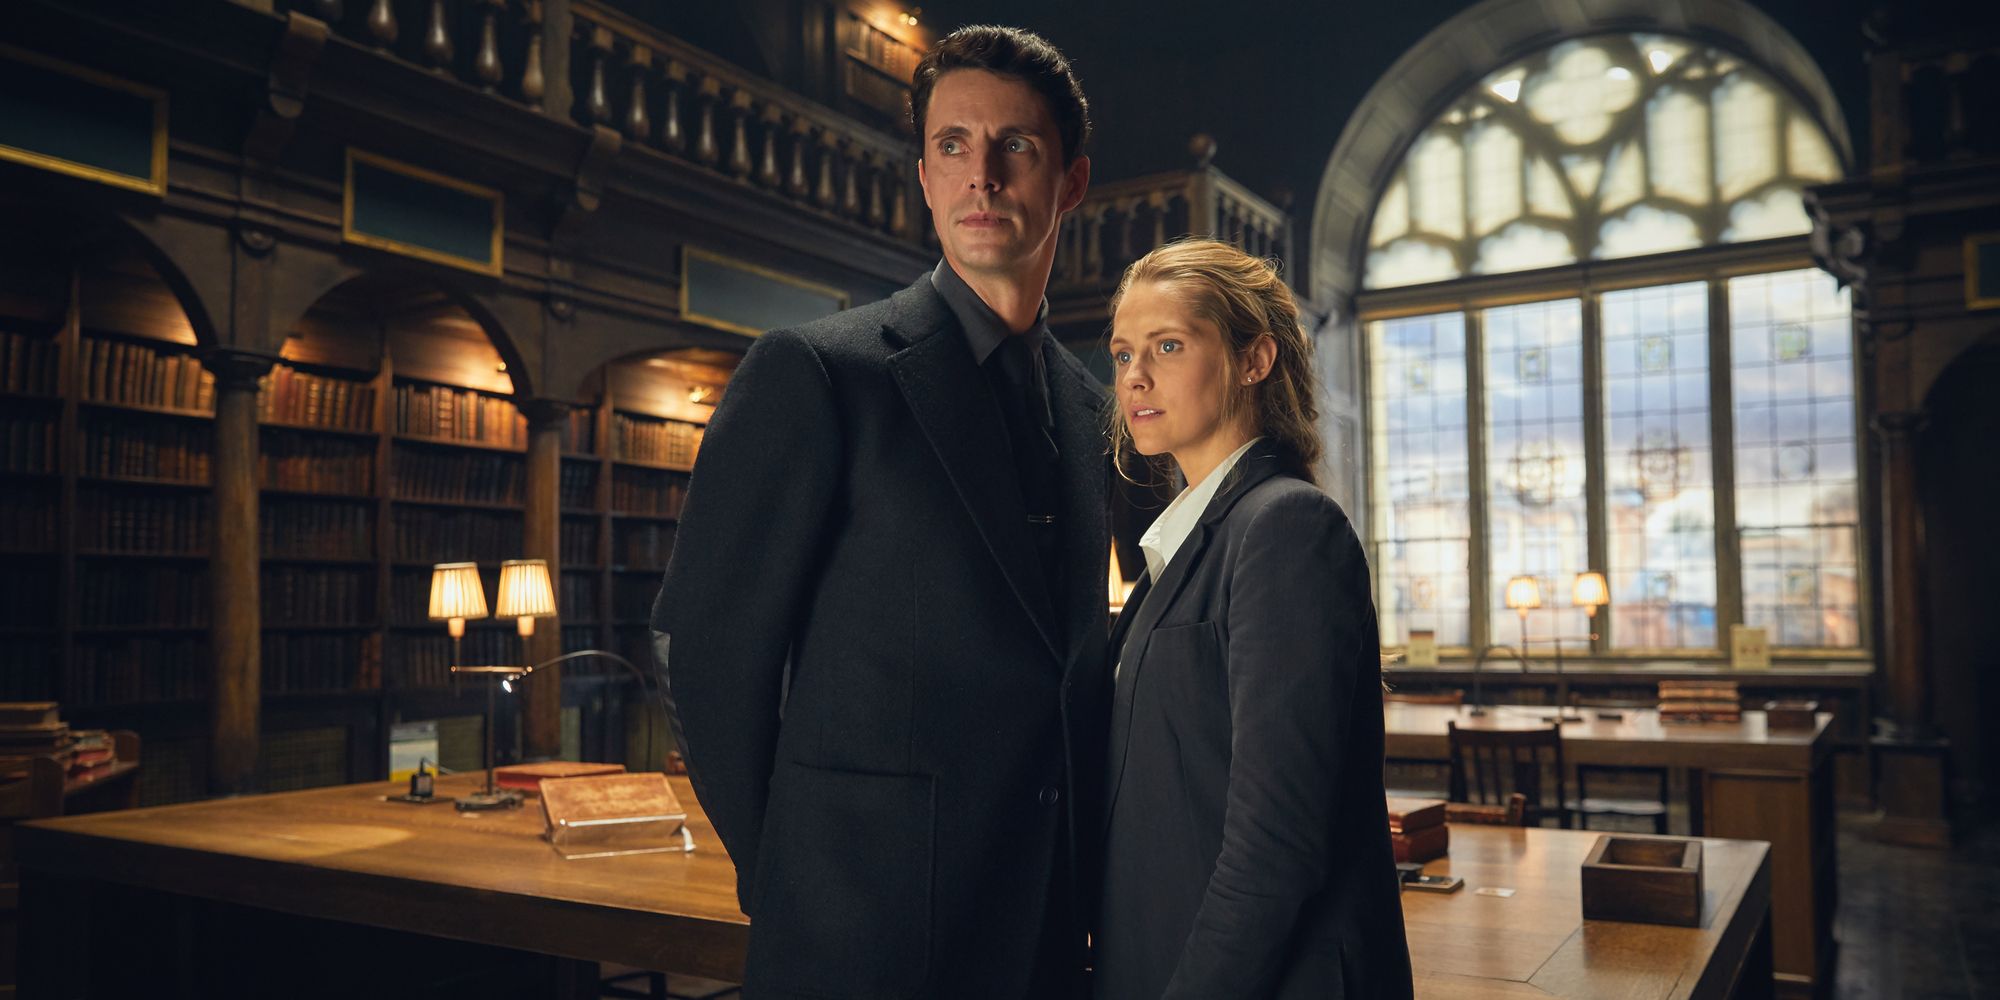 Matthew (Matthew Goode) and Diana (Teresa Palmer) in a library in A Discovery of Witches in A Discovery of Witches